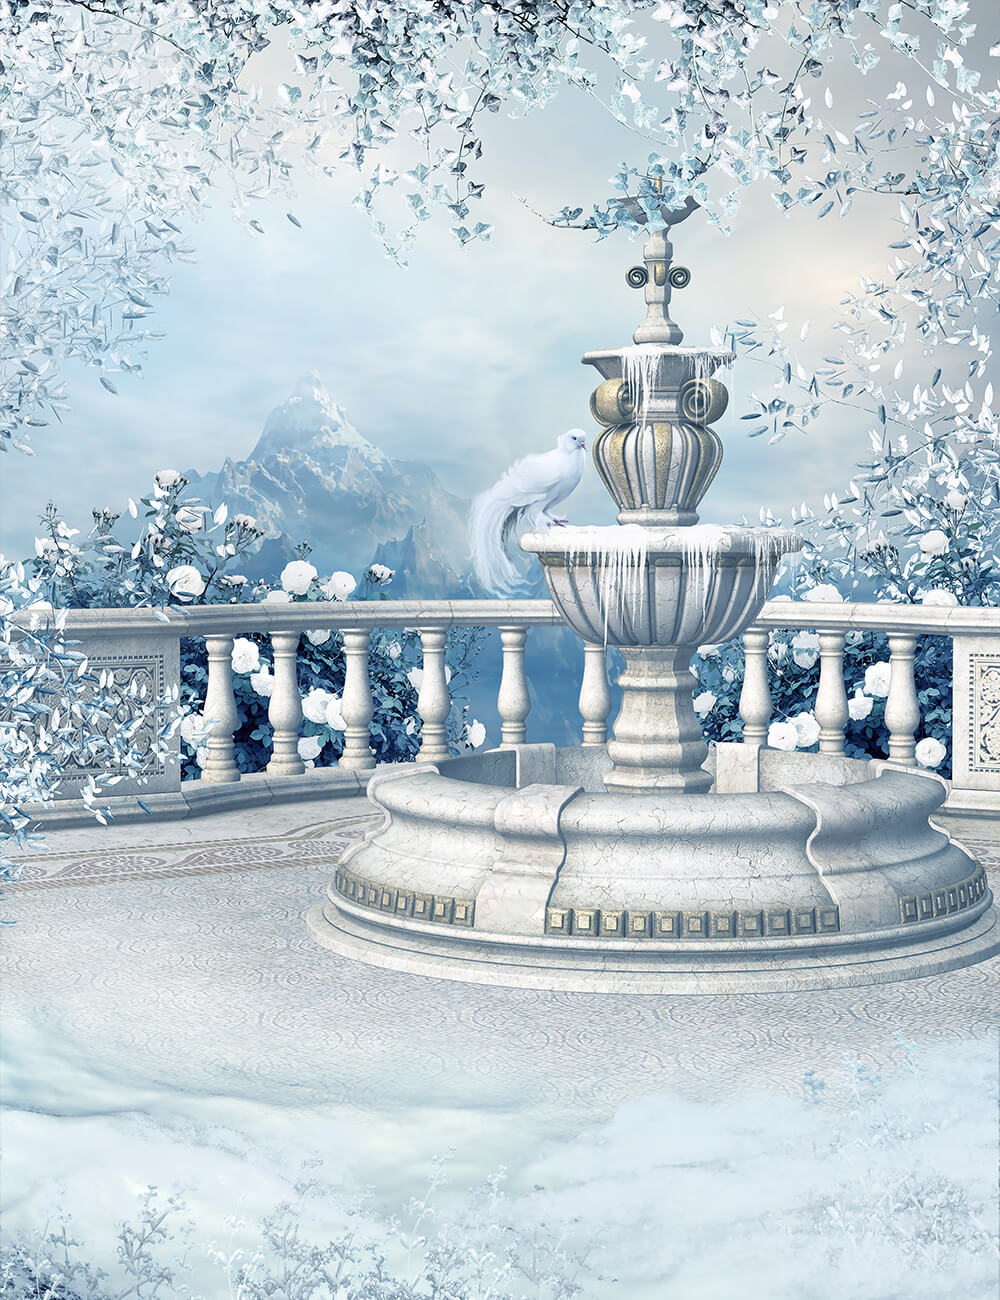 Fairytale Fountain Freezing Backdrop For Baby Photography IBD-24569